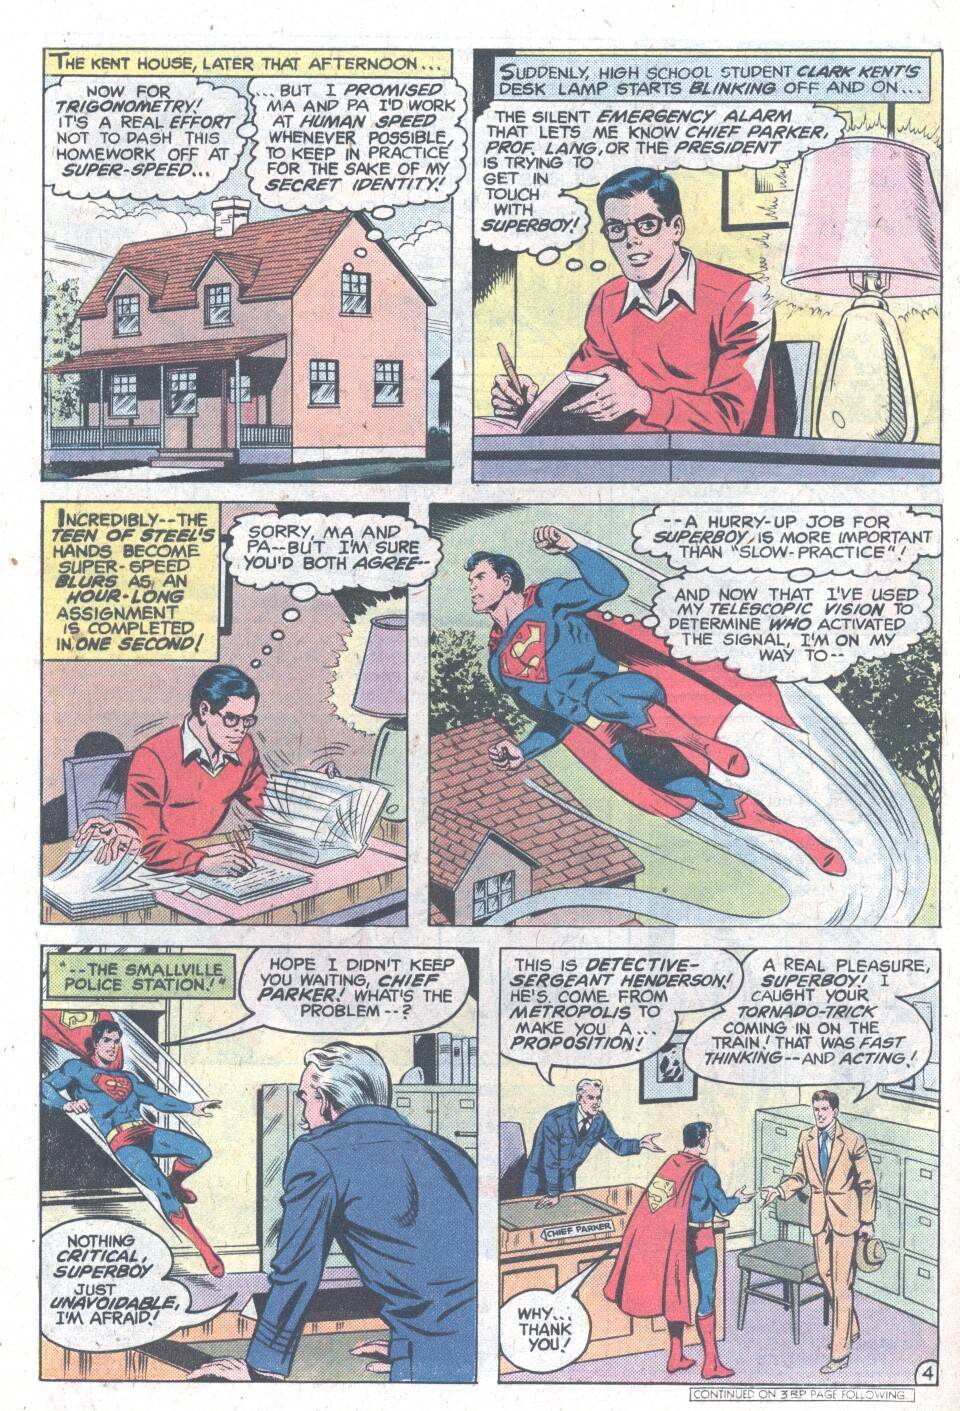 The New Adventures of Superboy 6 Page 4